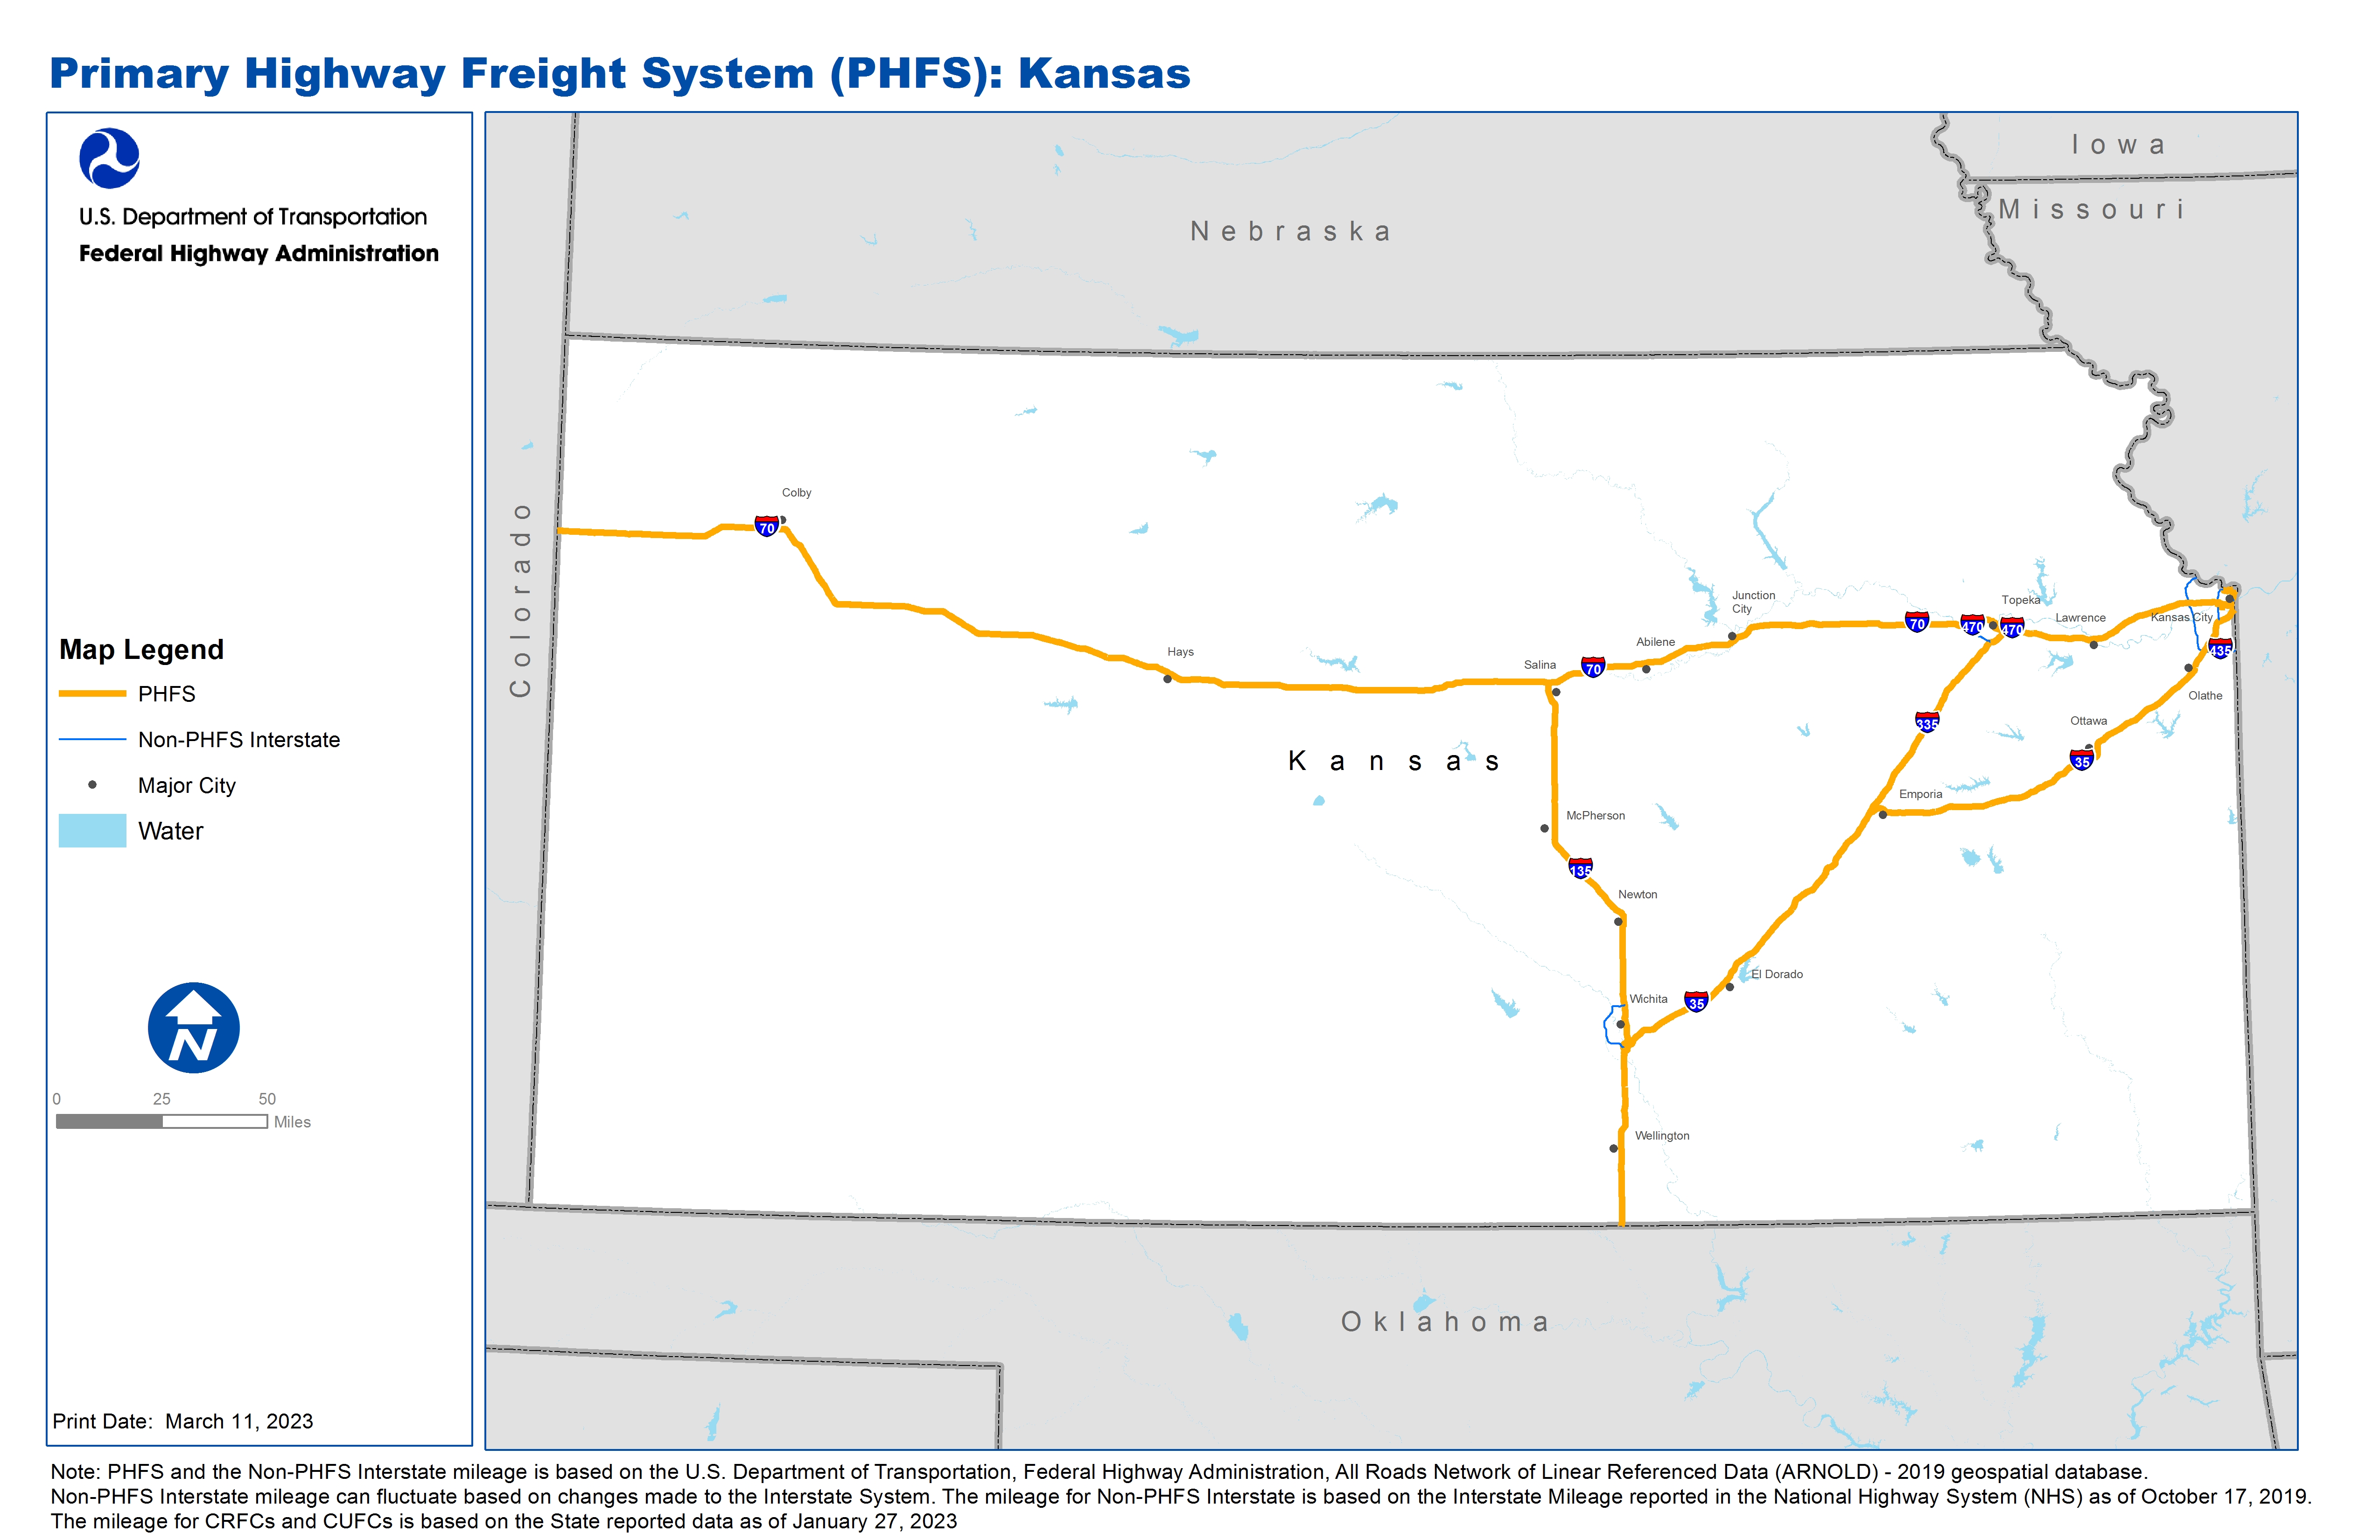 TThis map shows the Primary Highway Freight System (PHFS) routes as well as all the Interstate Highways within the state that are not part of the PHFS, as designated on 12/22/2022.